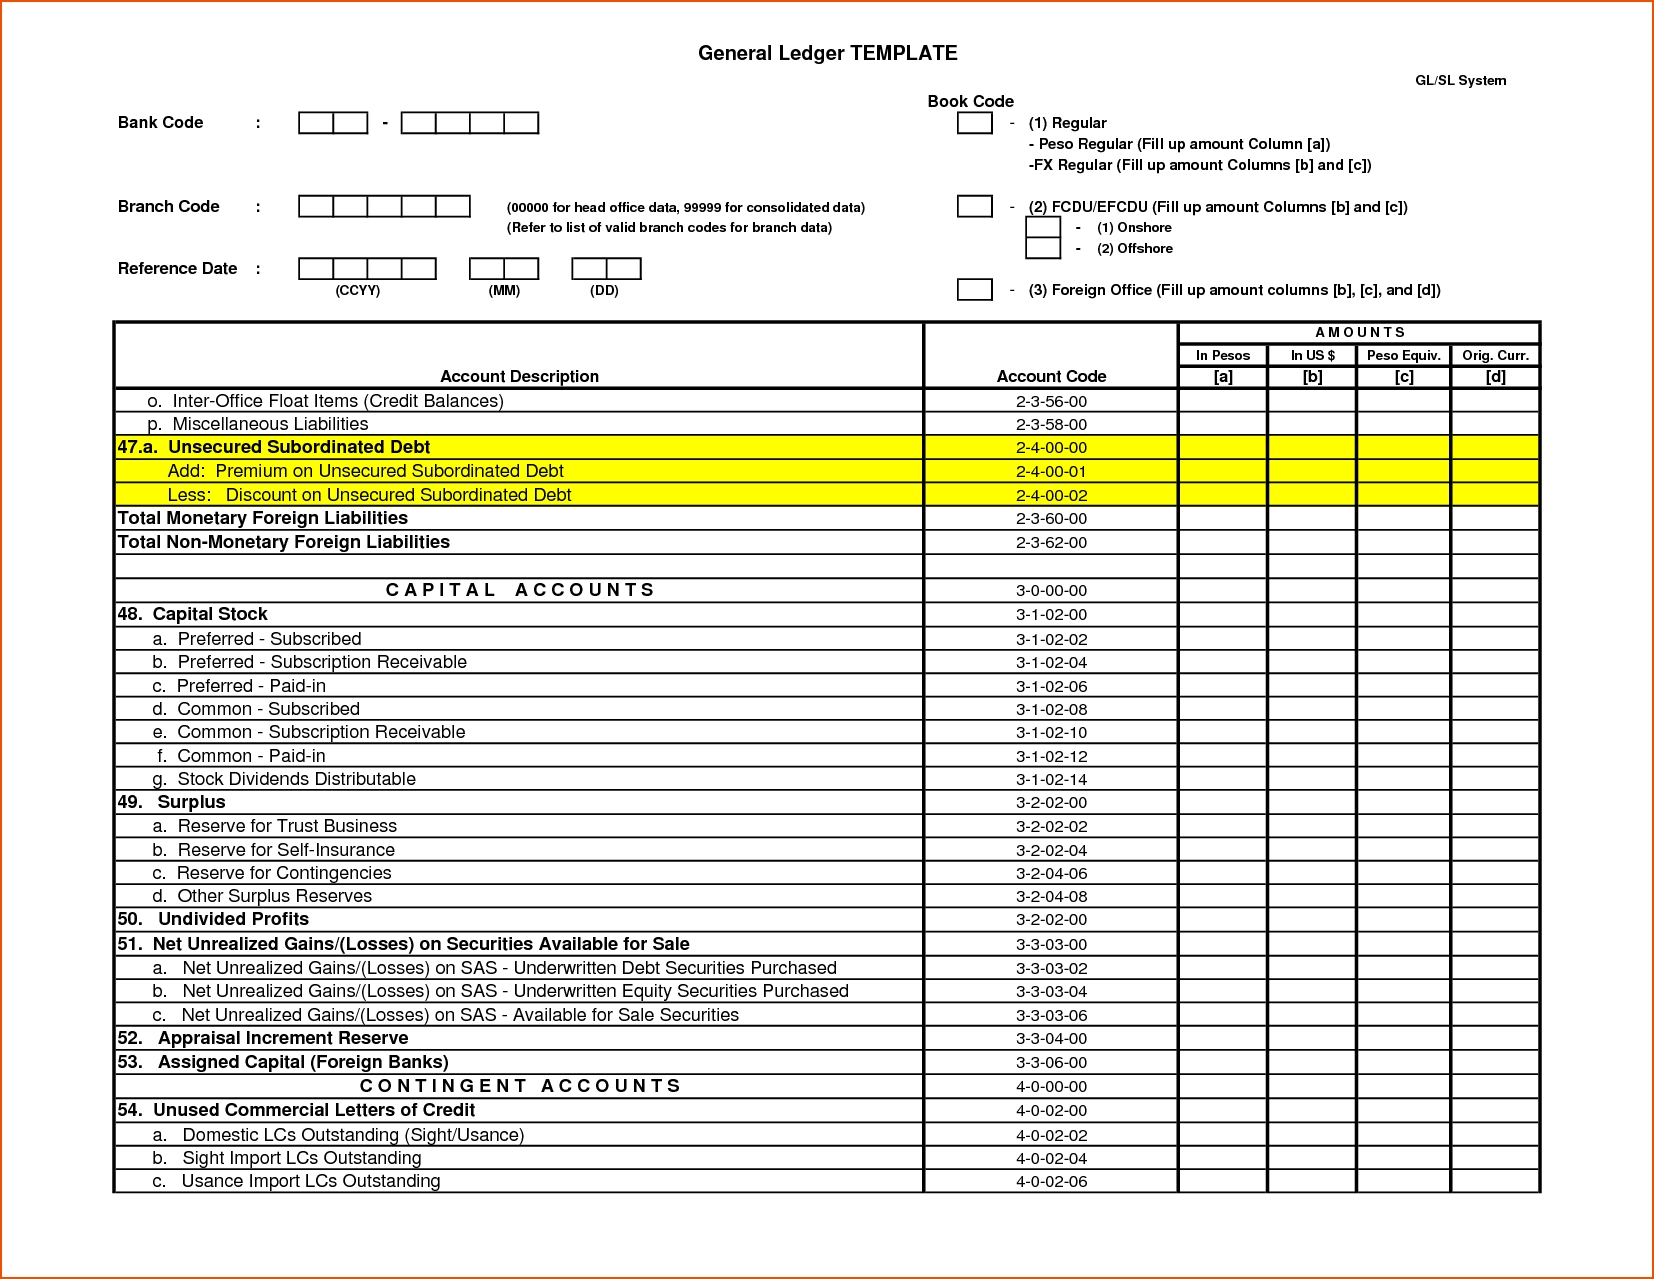 small-business-general-ledger-template-db-excel